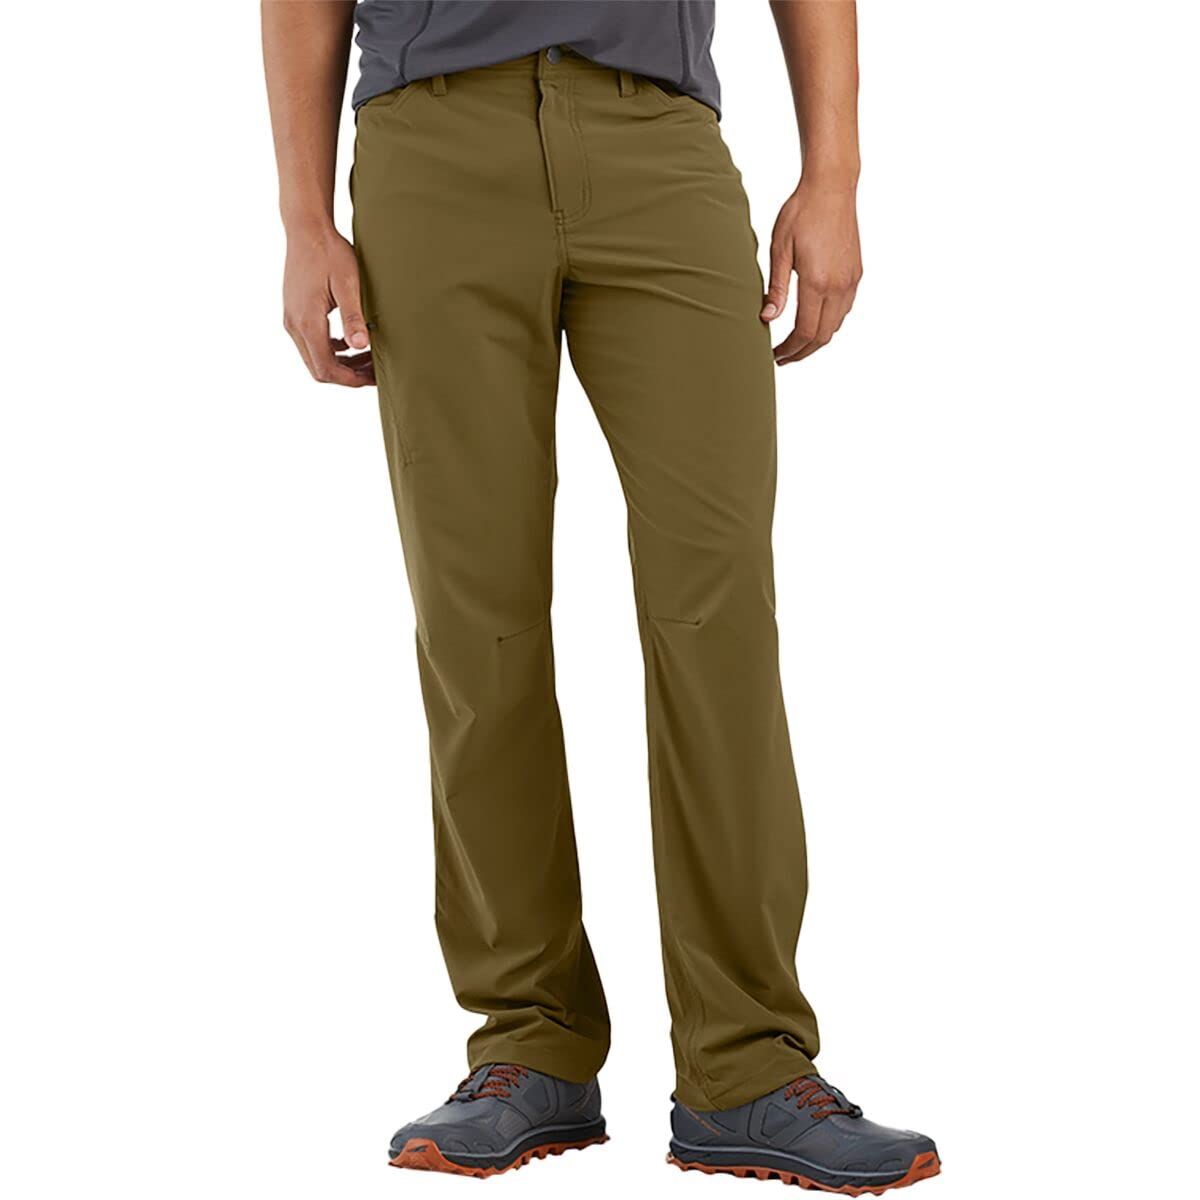 Banded Utility 2.0 Soft-Shell Pant